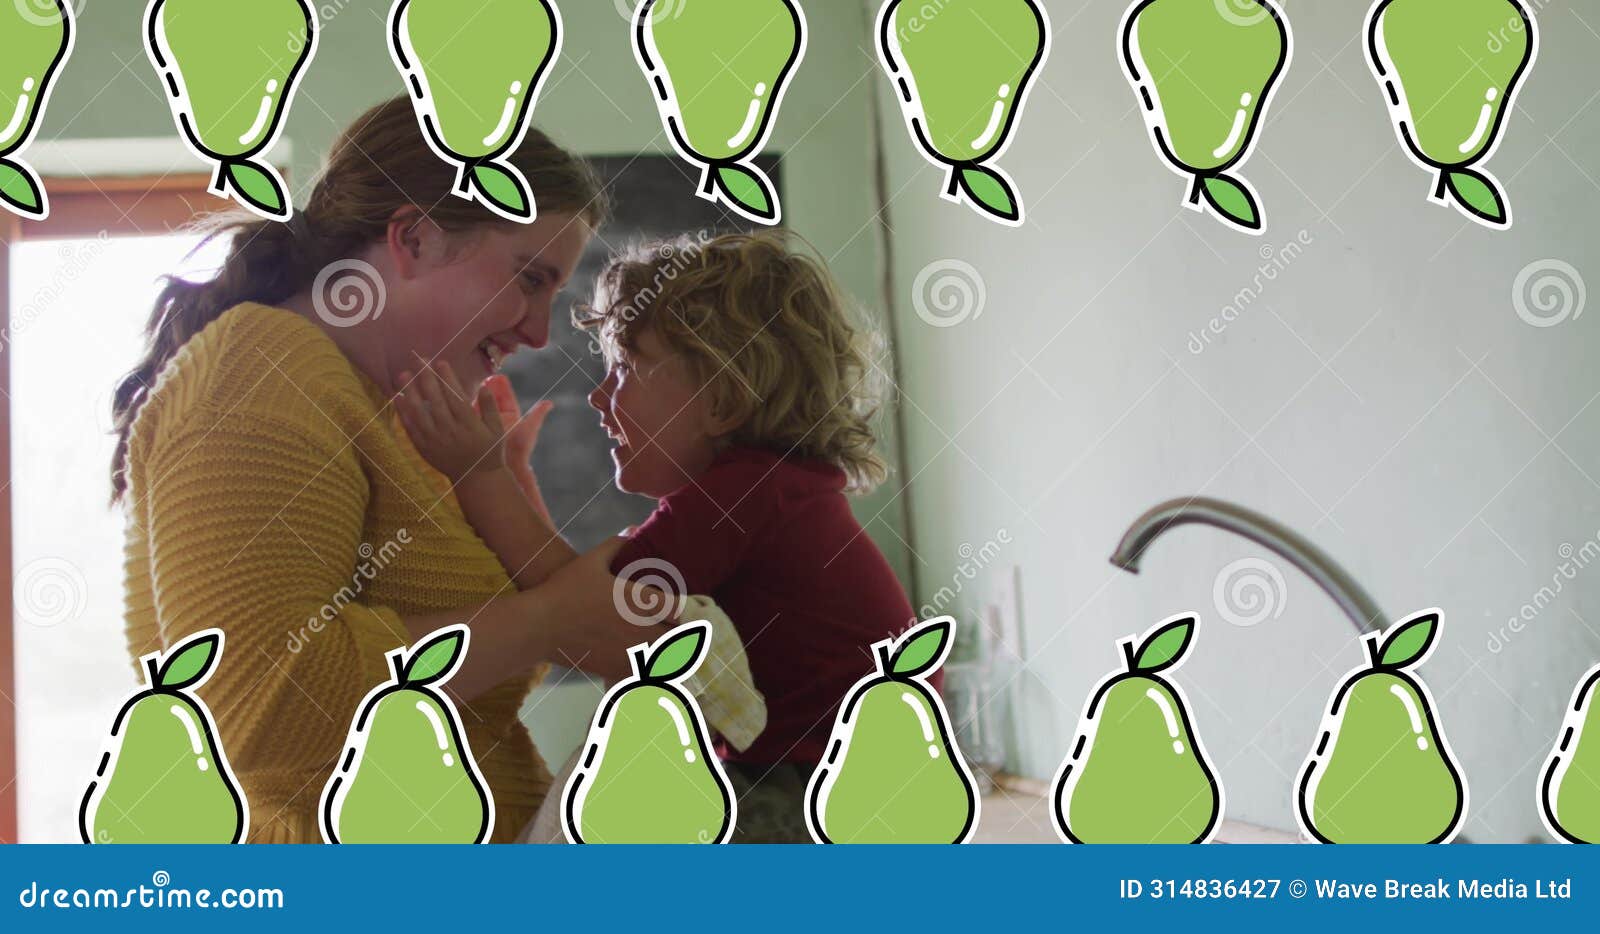 image of pear icons over caucasian woman with son in kitchen